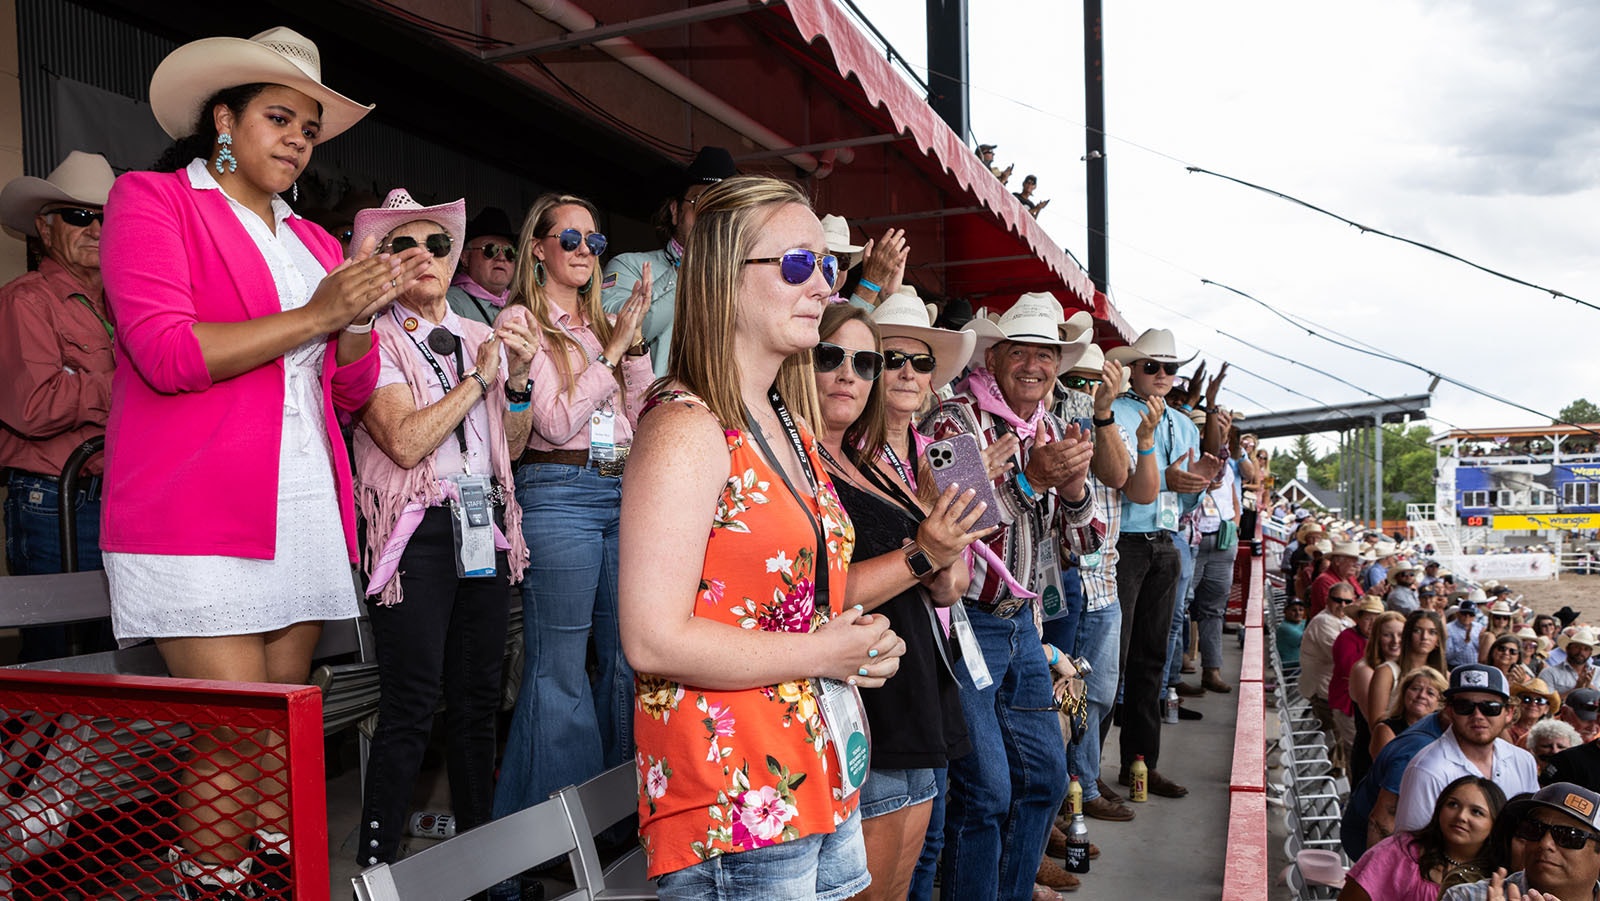 Rawlins EMT Tiffany Gruetzmacher was given two standing ovations by 10,000 people at Cheyenne Frontier Days on Thursday, honored as a hometown hero.